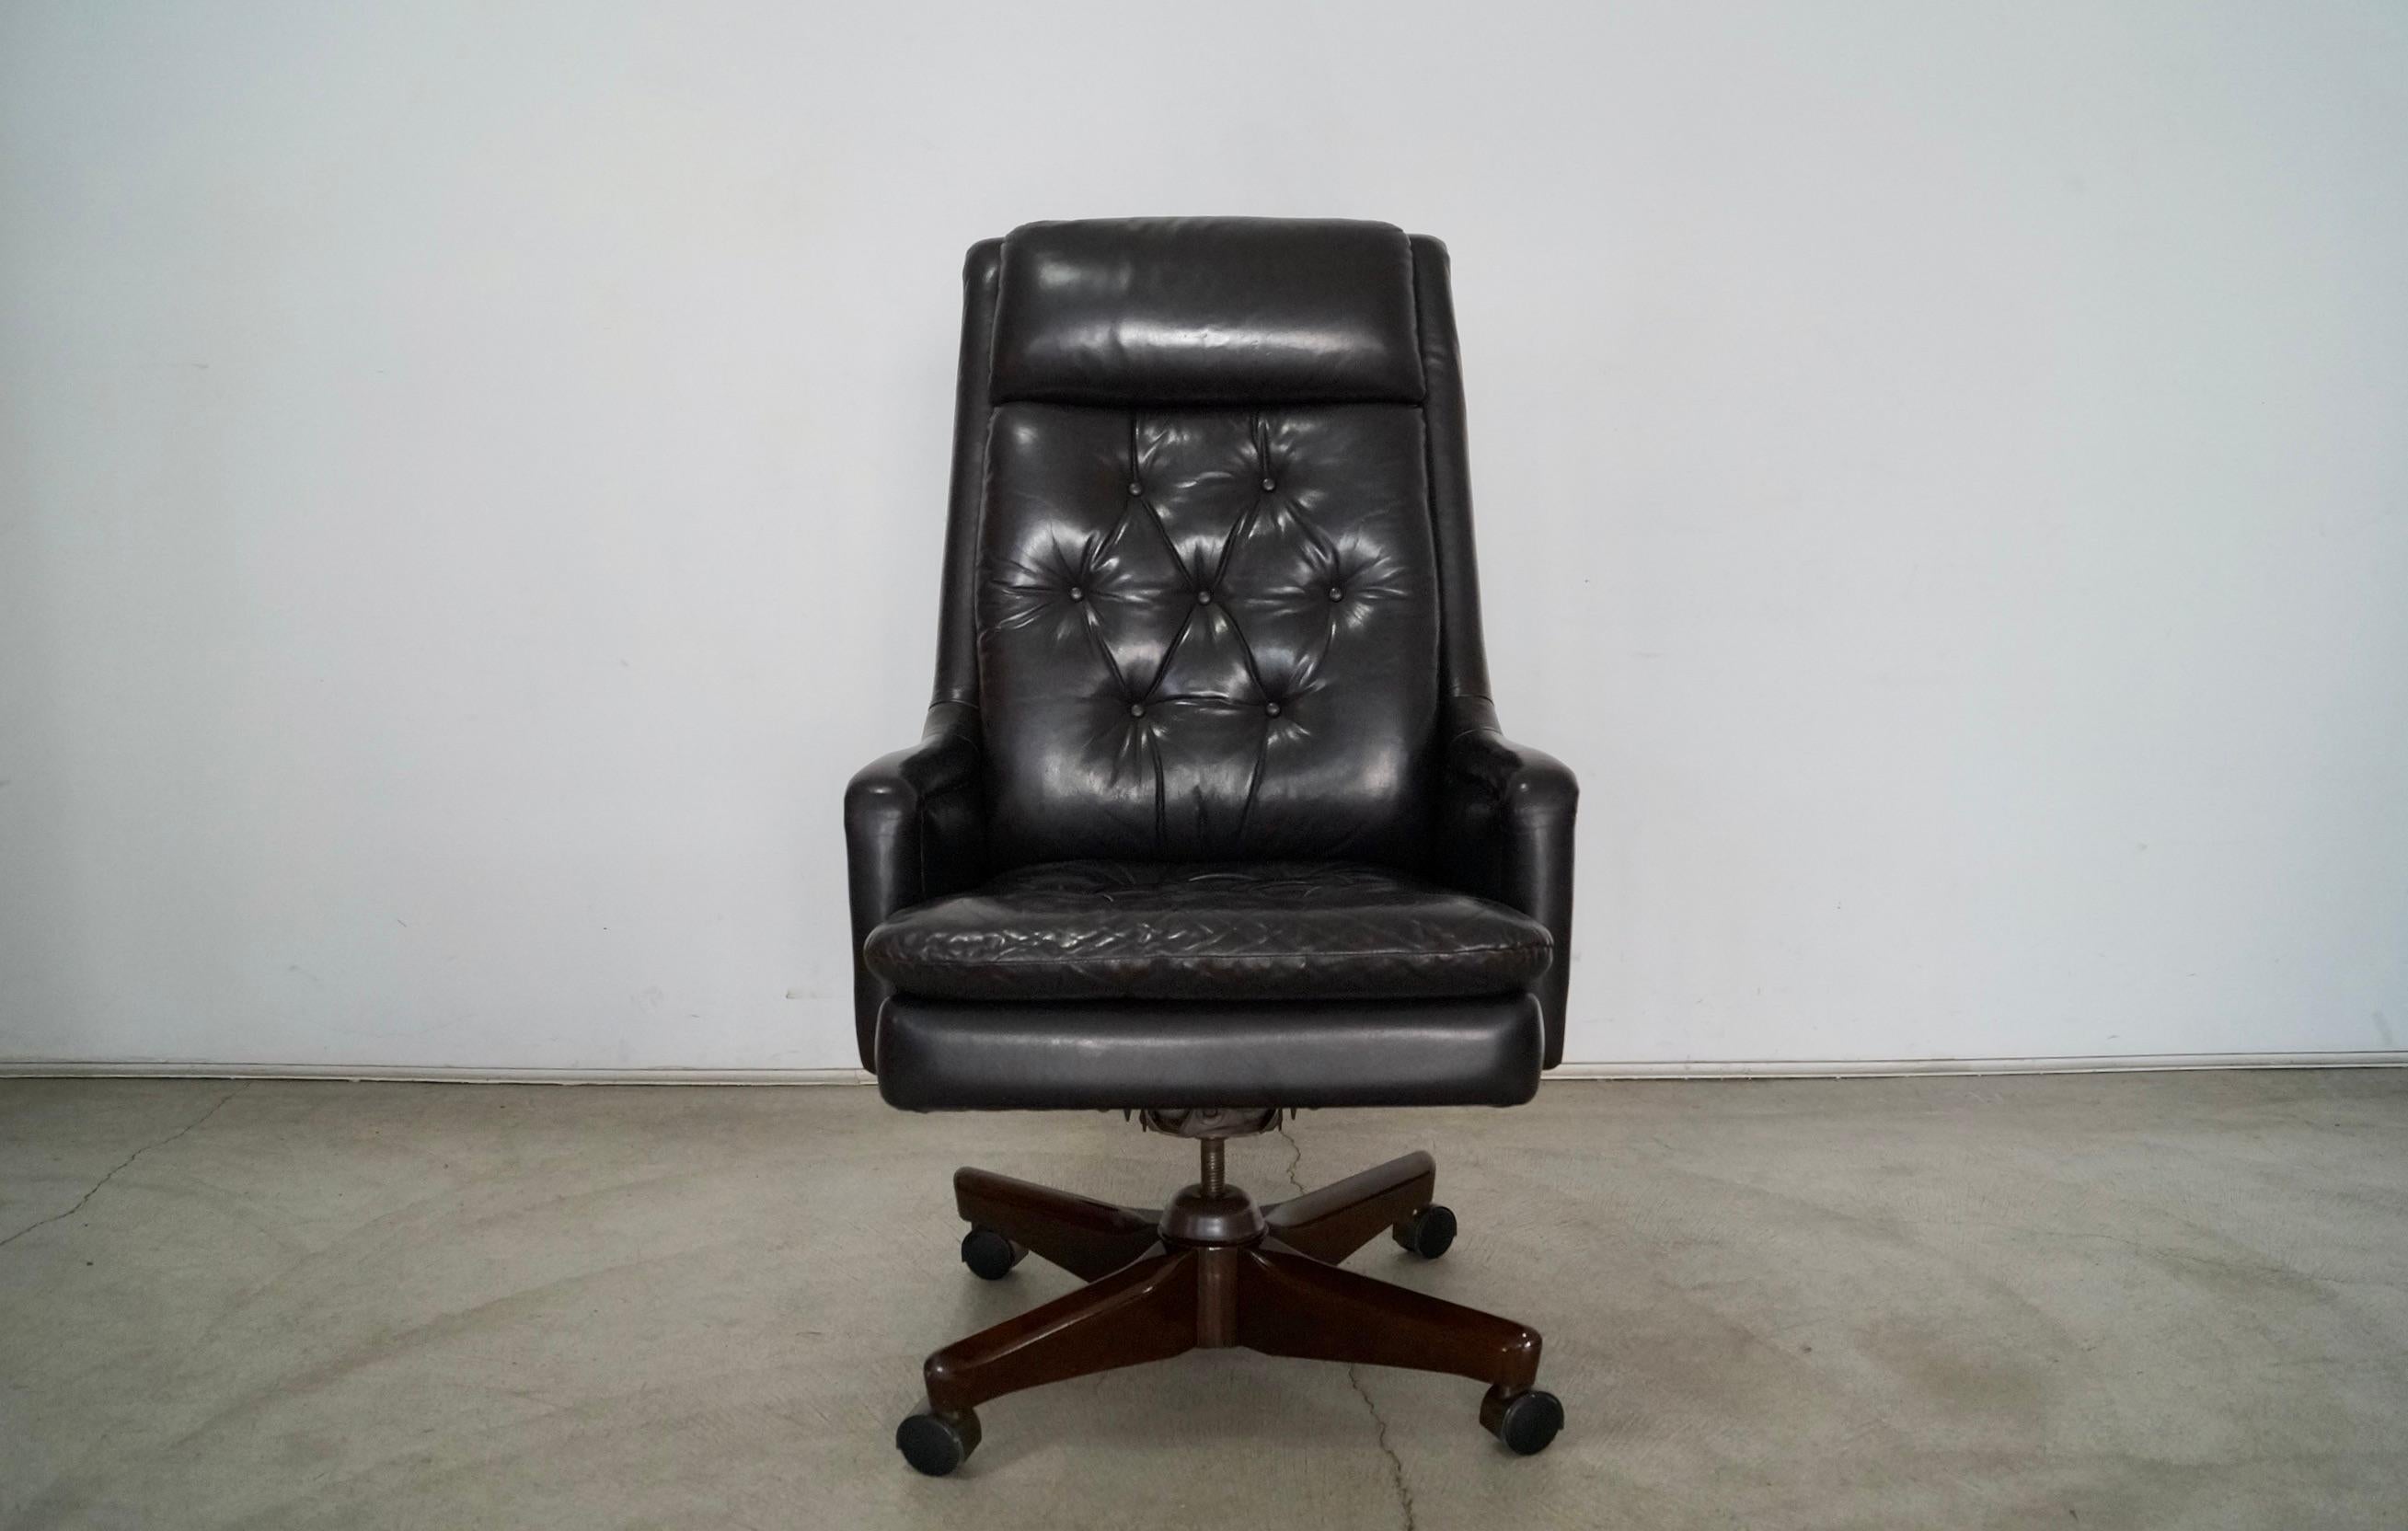 Vintage executive leather desk chair for sale. Manufactured by Monteverdi-Young in 1984, and still has the original tag. It's a really high-quality office chair with a dark brown leather, and is diamond tufted. It's really well made and solid, and